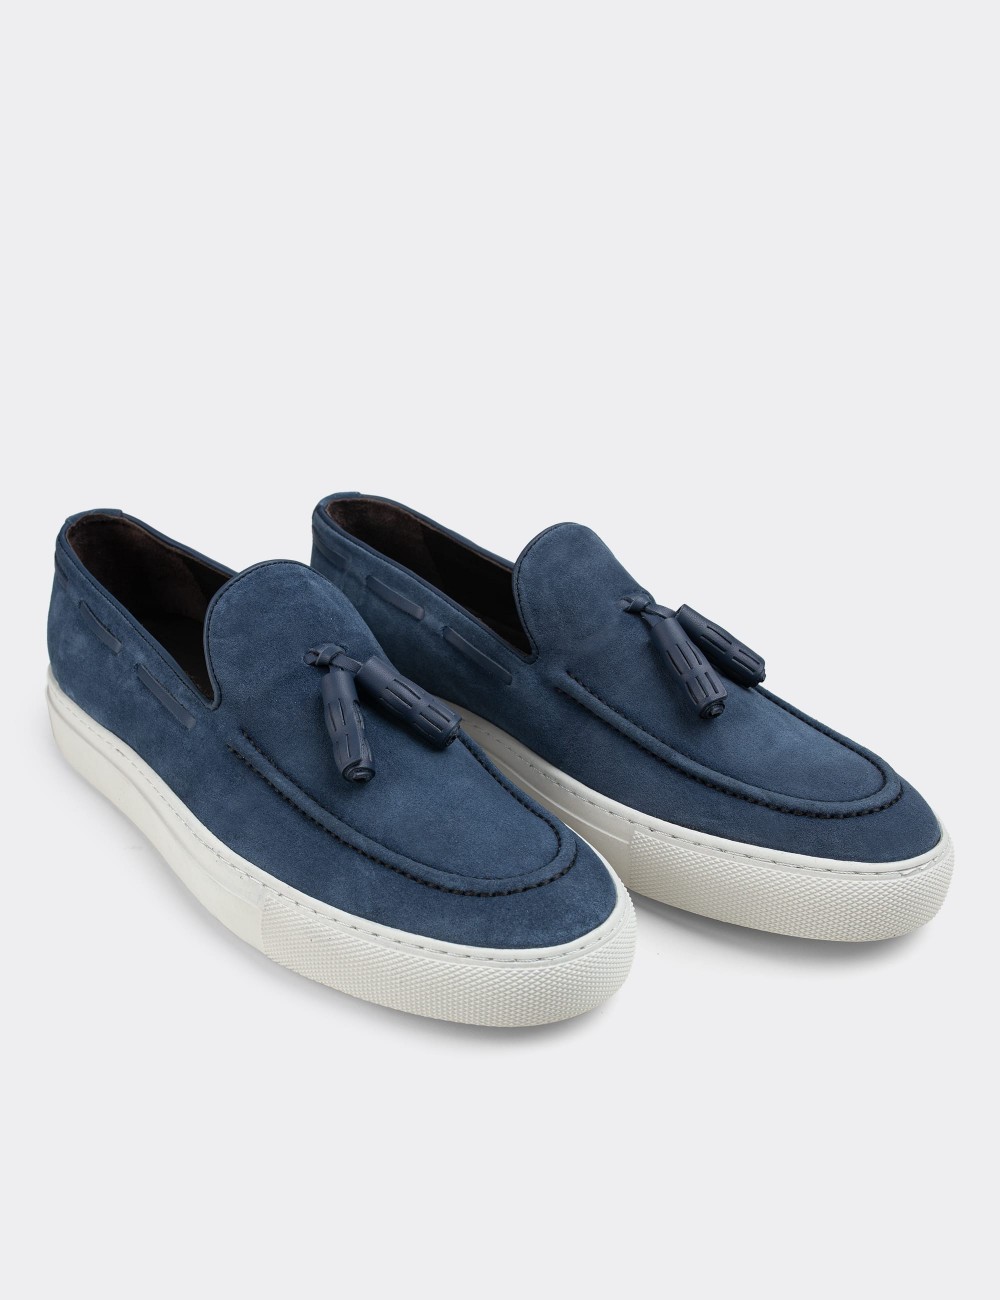 Blue Suede Leather Sneakers - 01836MMVIC01